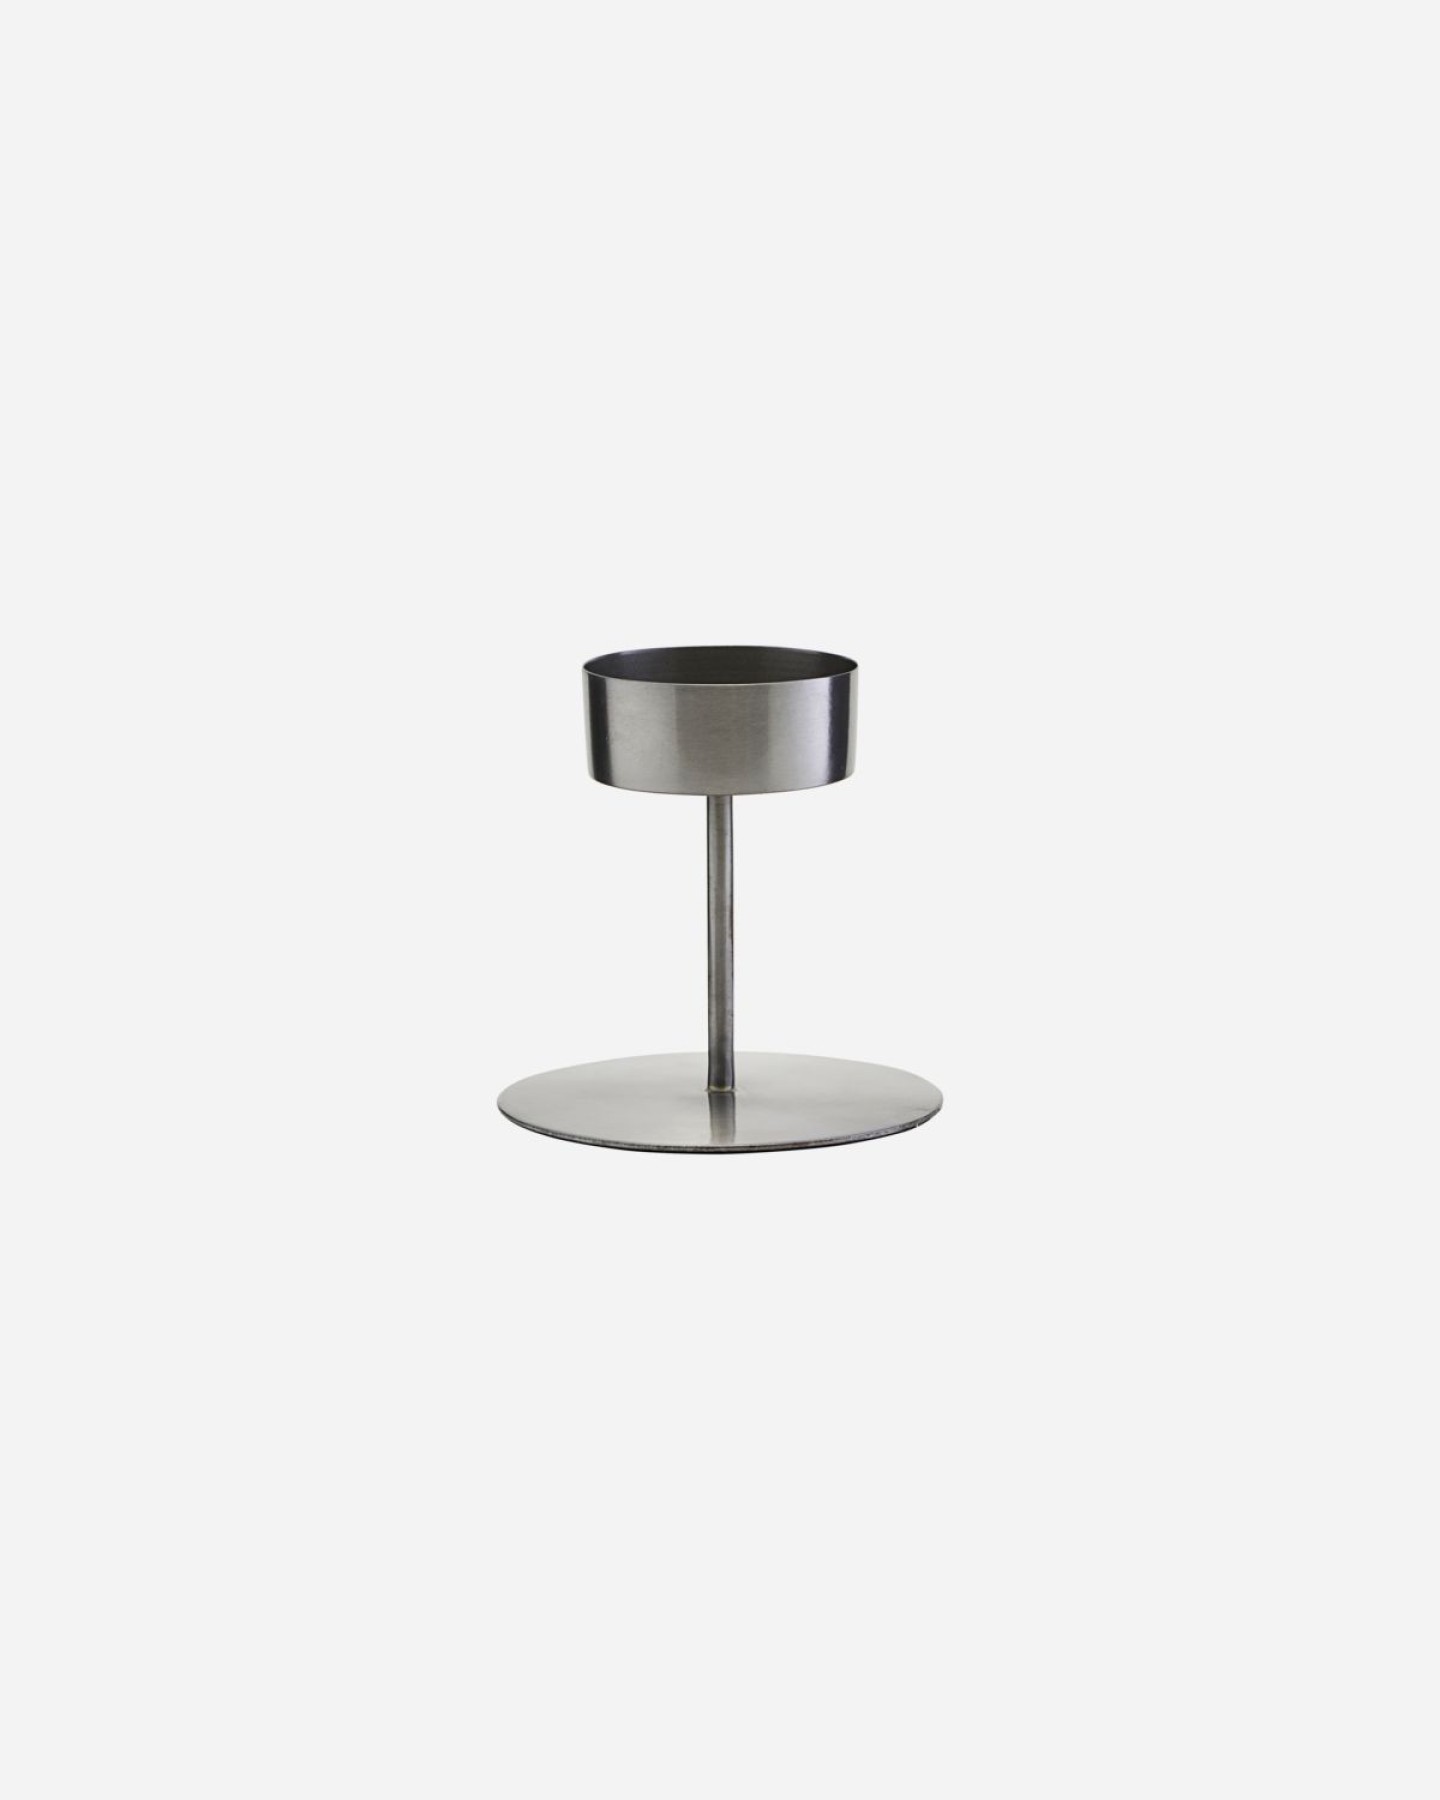 THE ANIT CANDLE STAND